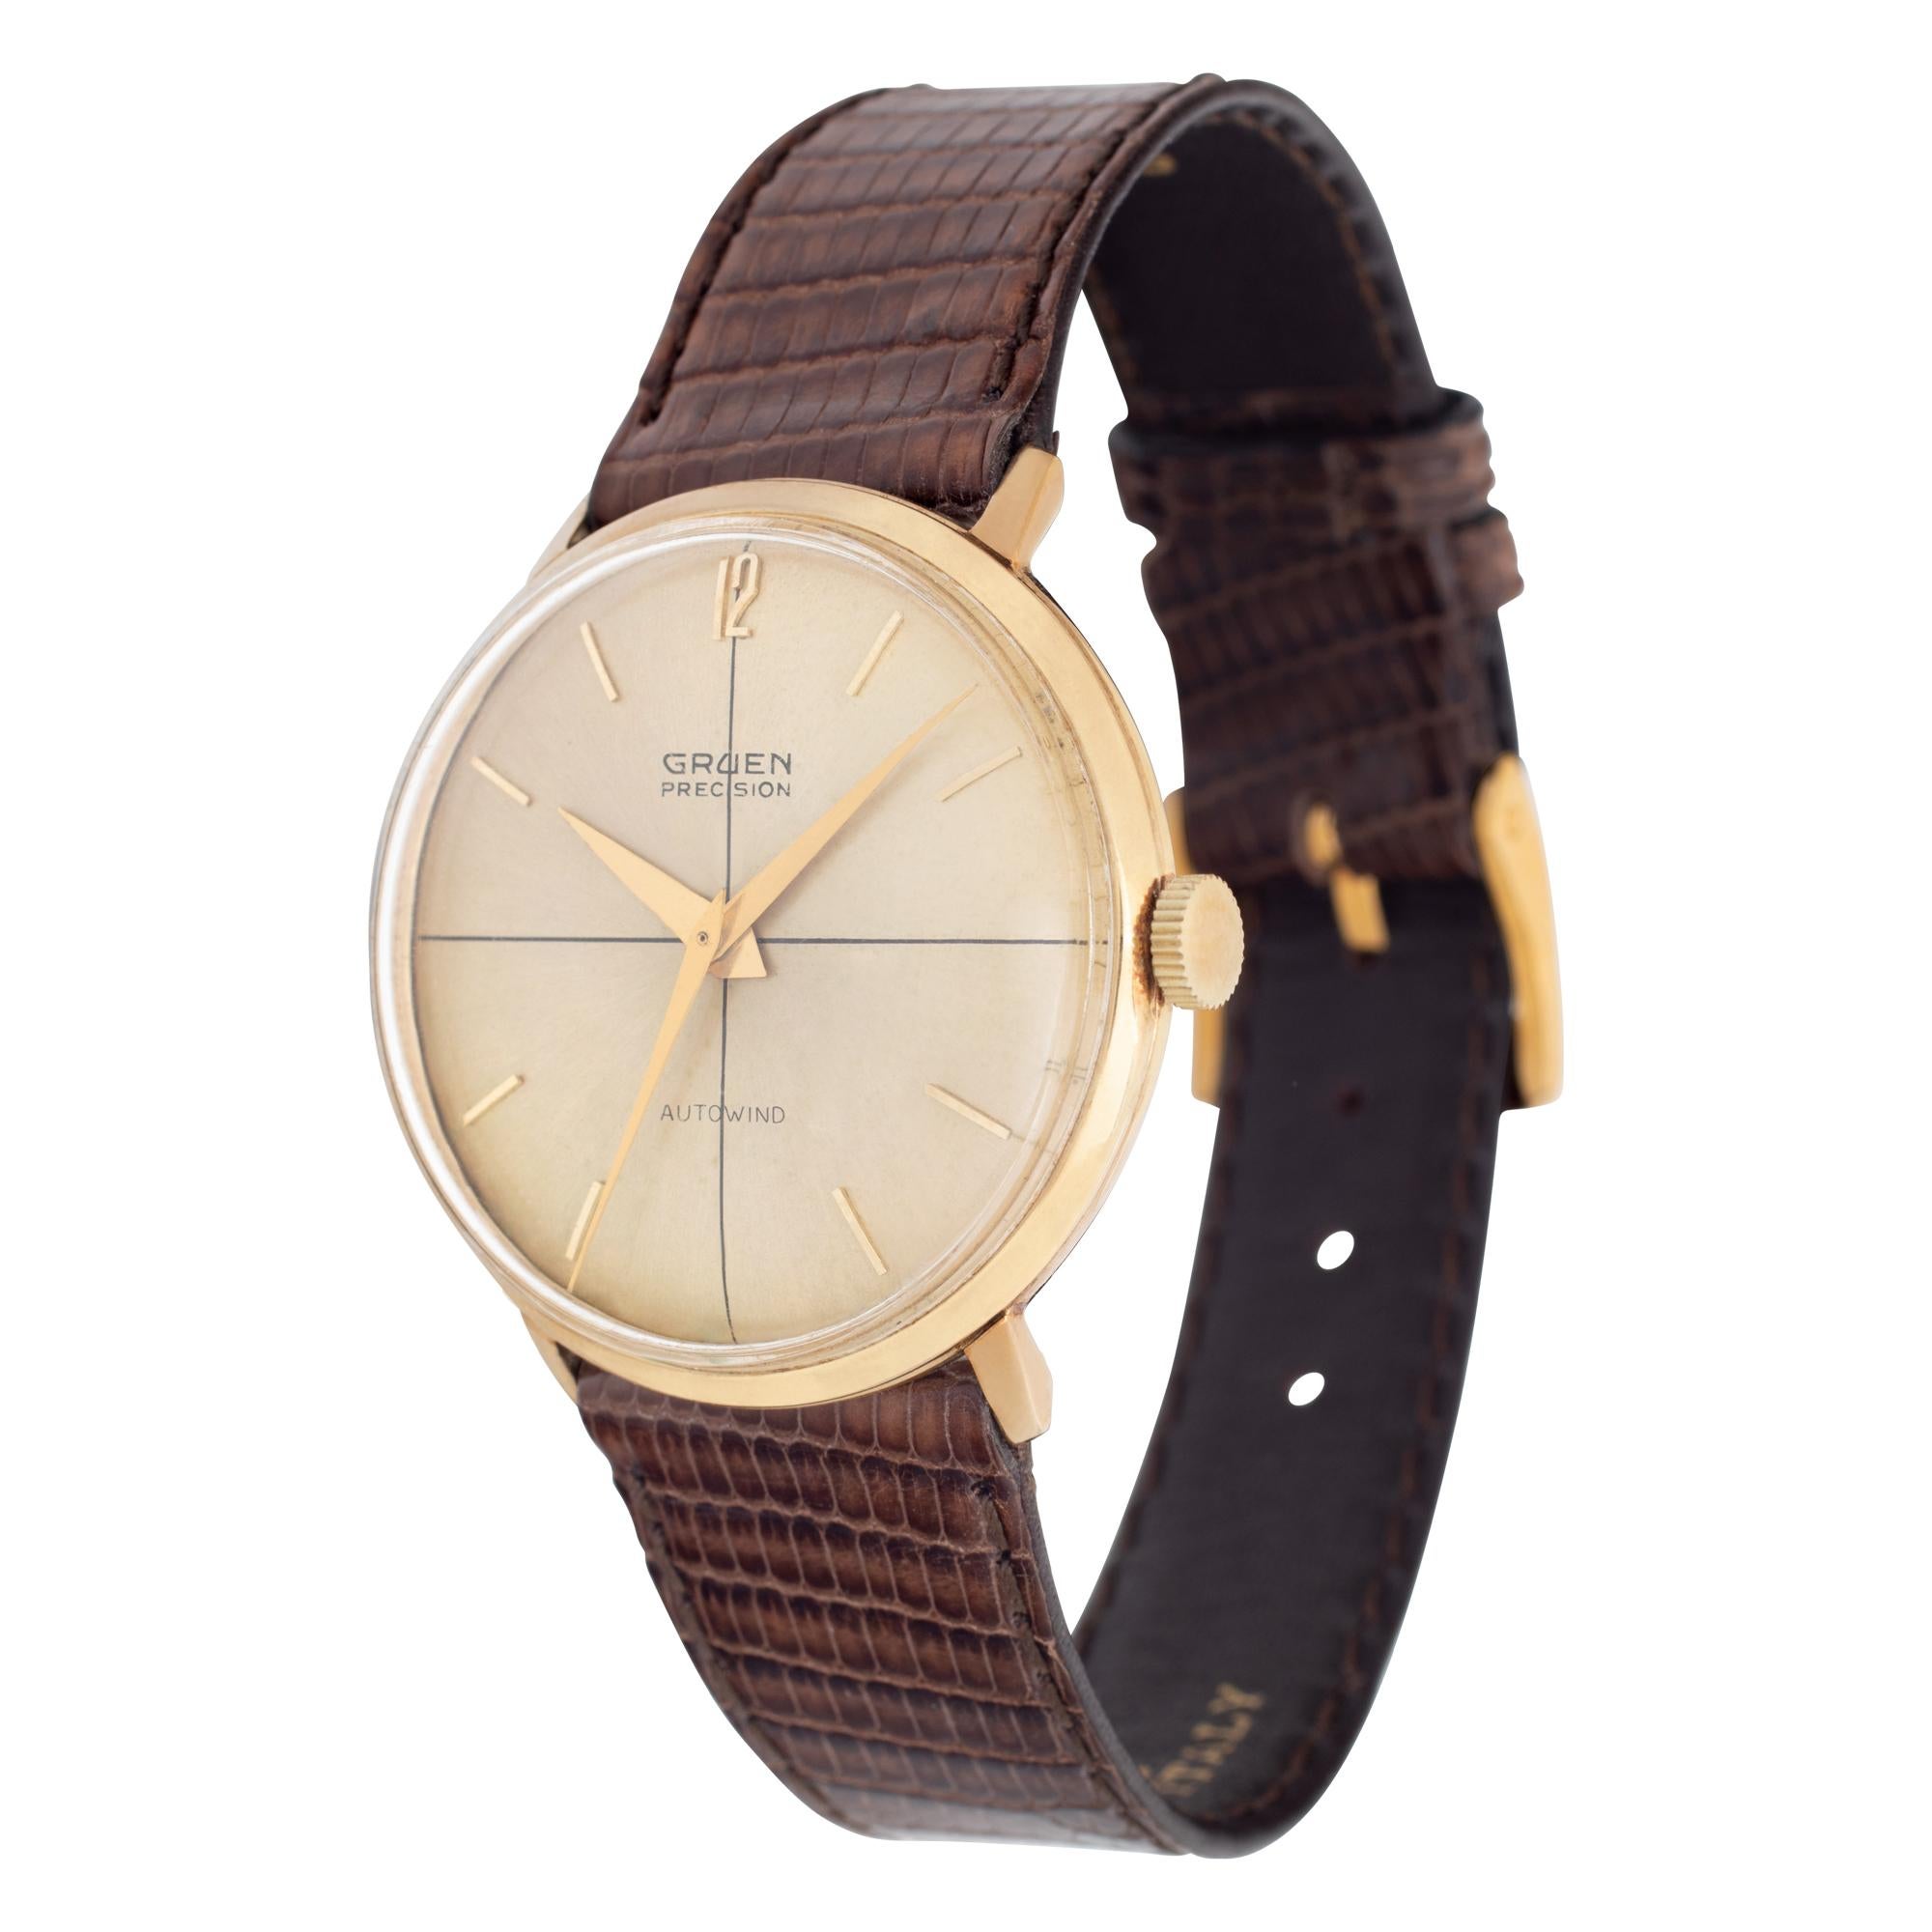 Vintage Gruen Precision Autowind in 14k yellow gold on a brown lizard strap. Automatic with sweep seconds. 33mm case size. Fine Pre-owned Gruen Watch. Certified preowned Vintage Gruen Precision watch is made out of yellow gold on a Brown Lizard